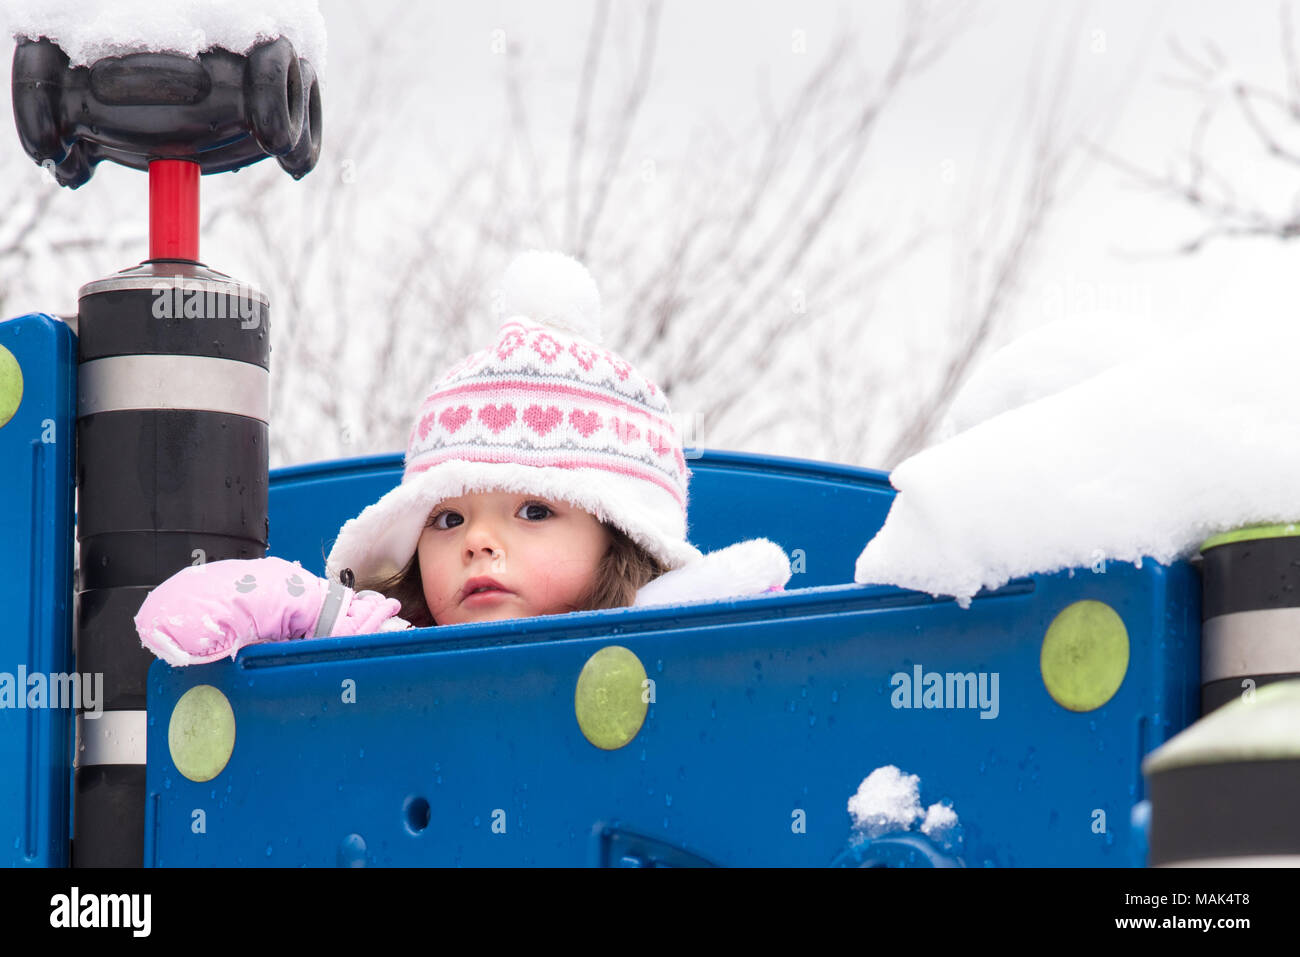 Toddler playing in a snow day Stock Photo